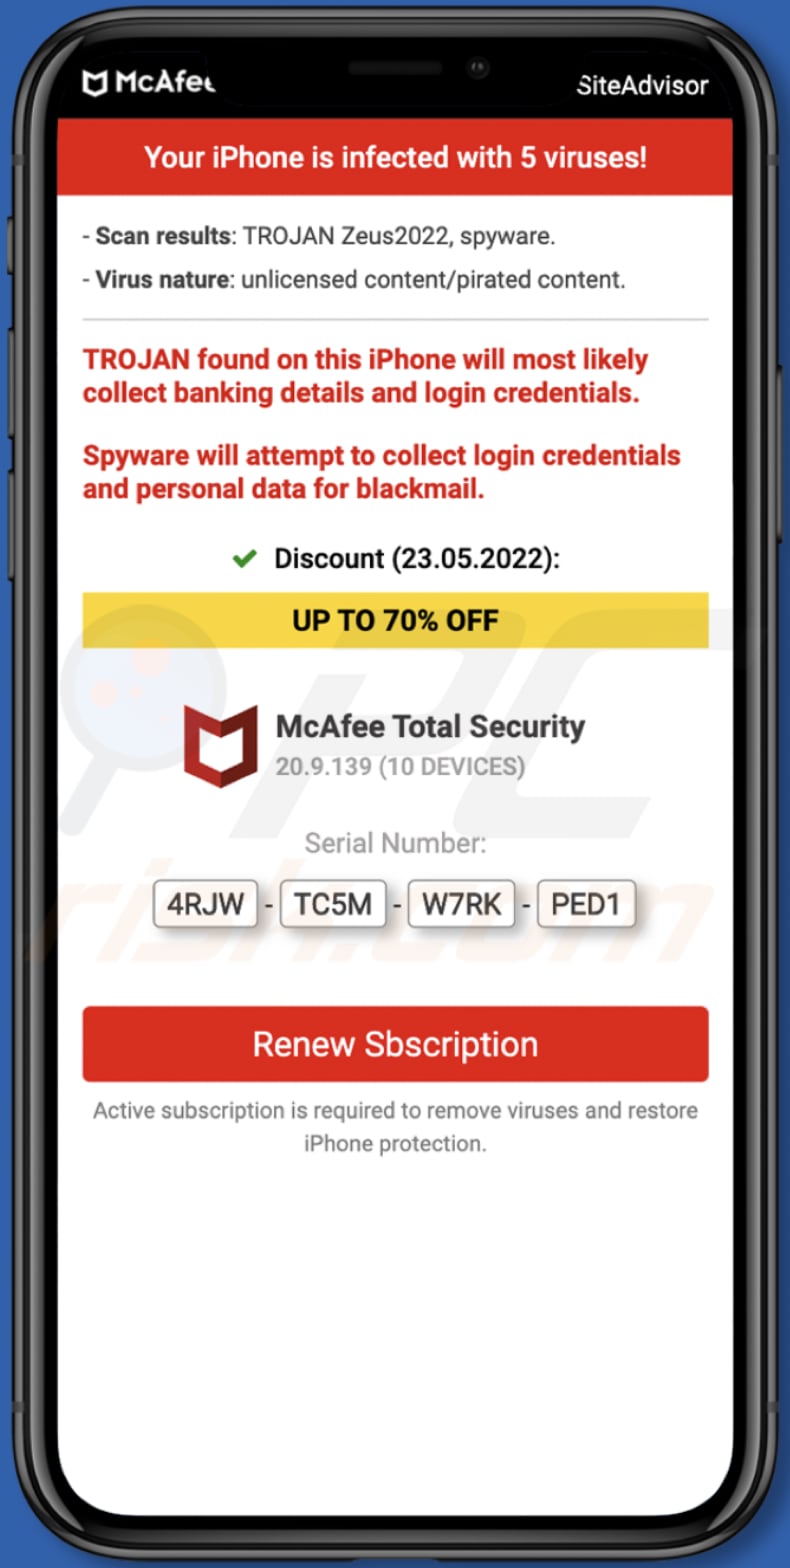 McAfee - Your iPhone is infected with 5 viruses! scam